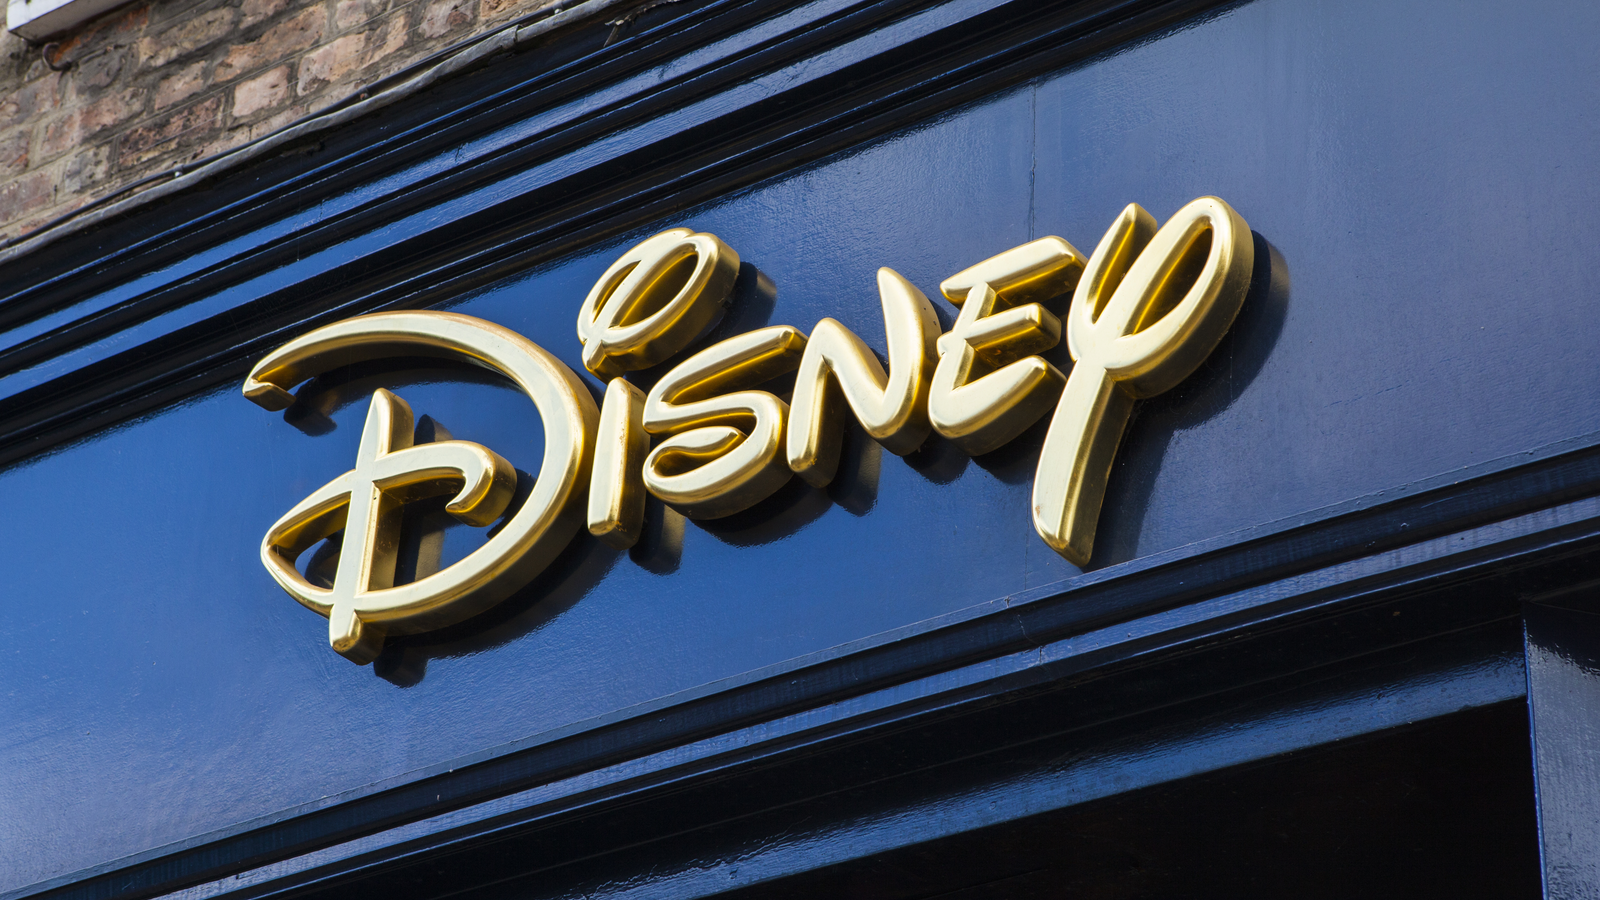 Disney logo on a store front. DIS stock representing Bob Iger news.